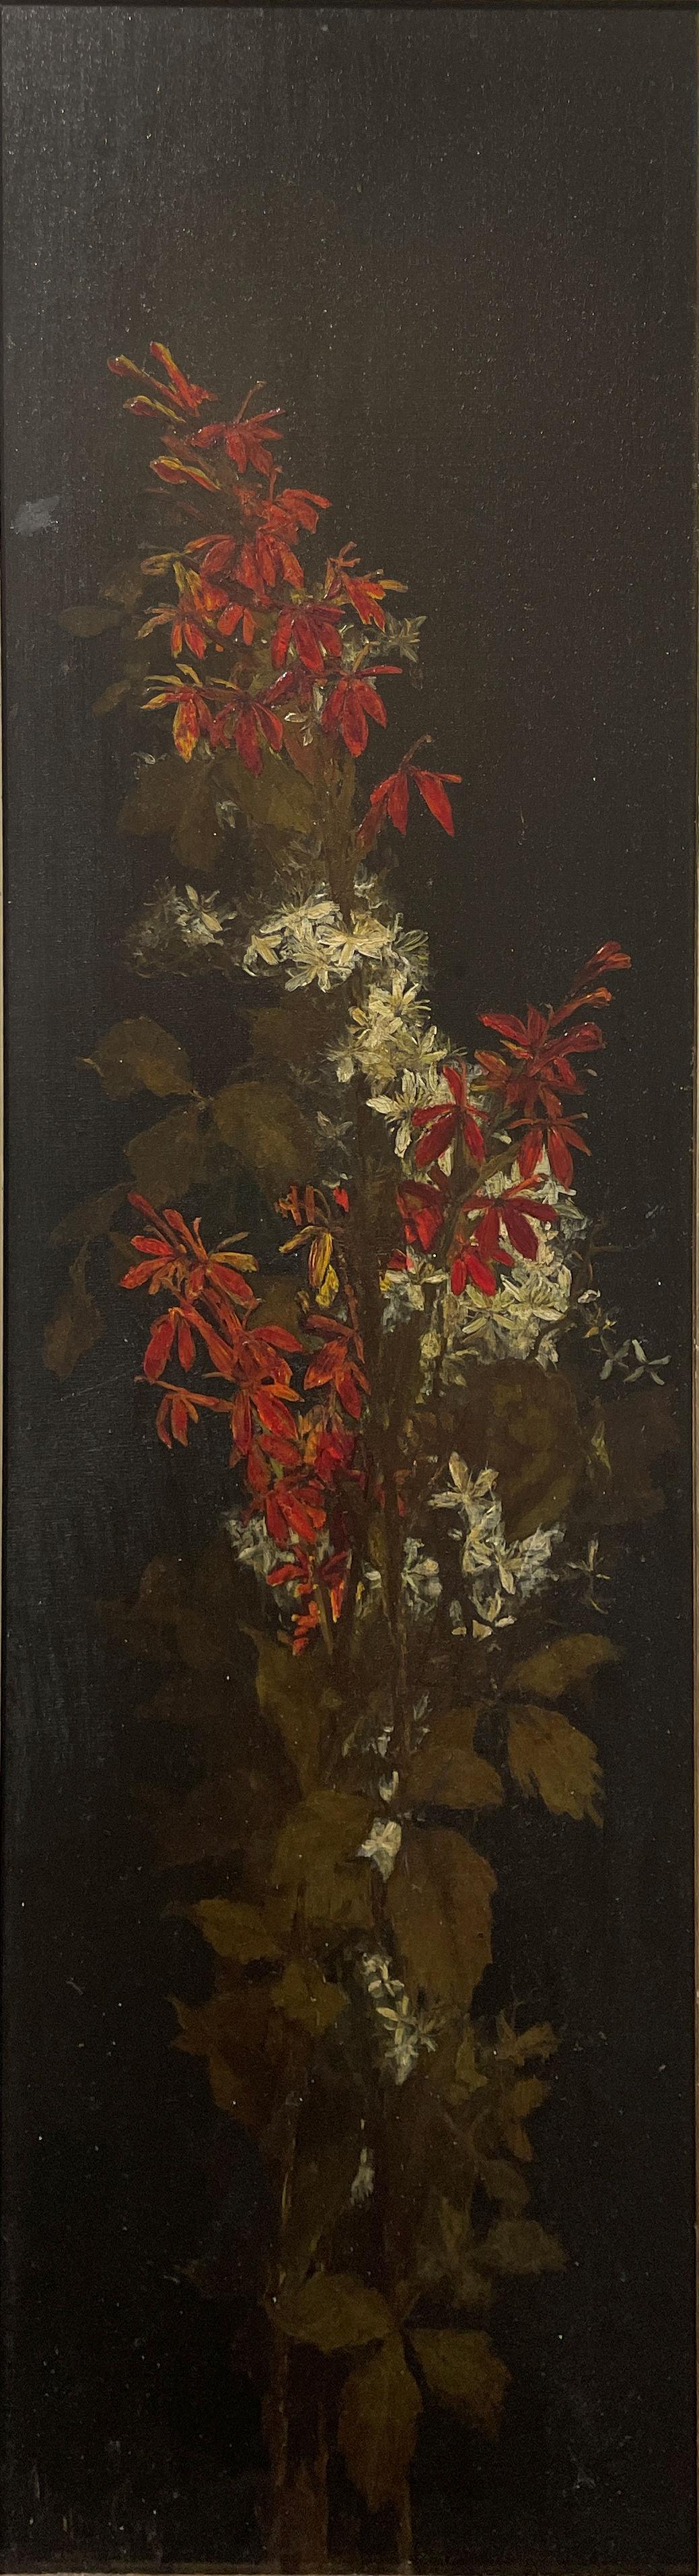 Walter Gay (1856 - 1937)
Cardinal Flowers Still Life, June, 1875
Signed lower left; dated on the reverse
Oil on board
24 3/4 x 7 1/8 inches

Provenance:
Private Collection, Brunswick, Maine

Born in Hingham, Massachusetts, Walter Gay became a